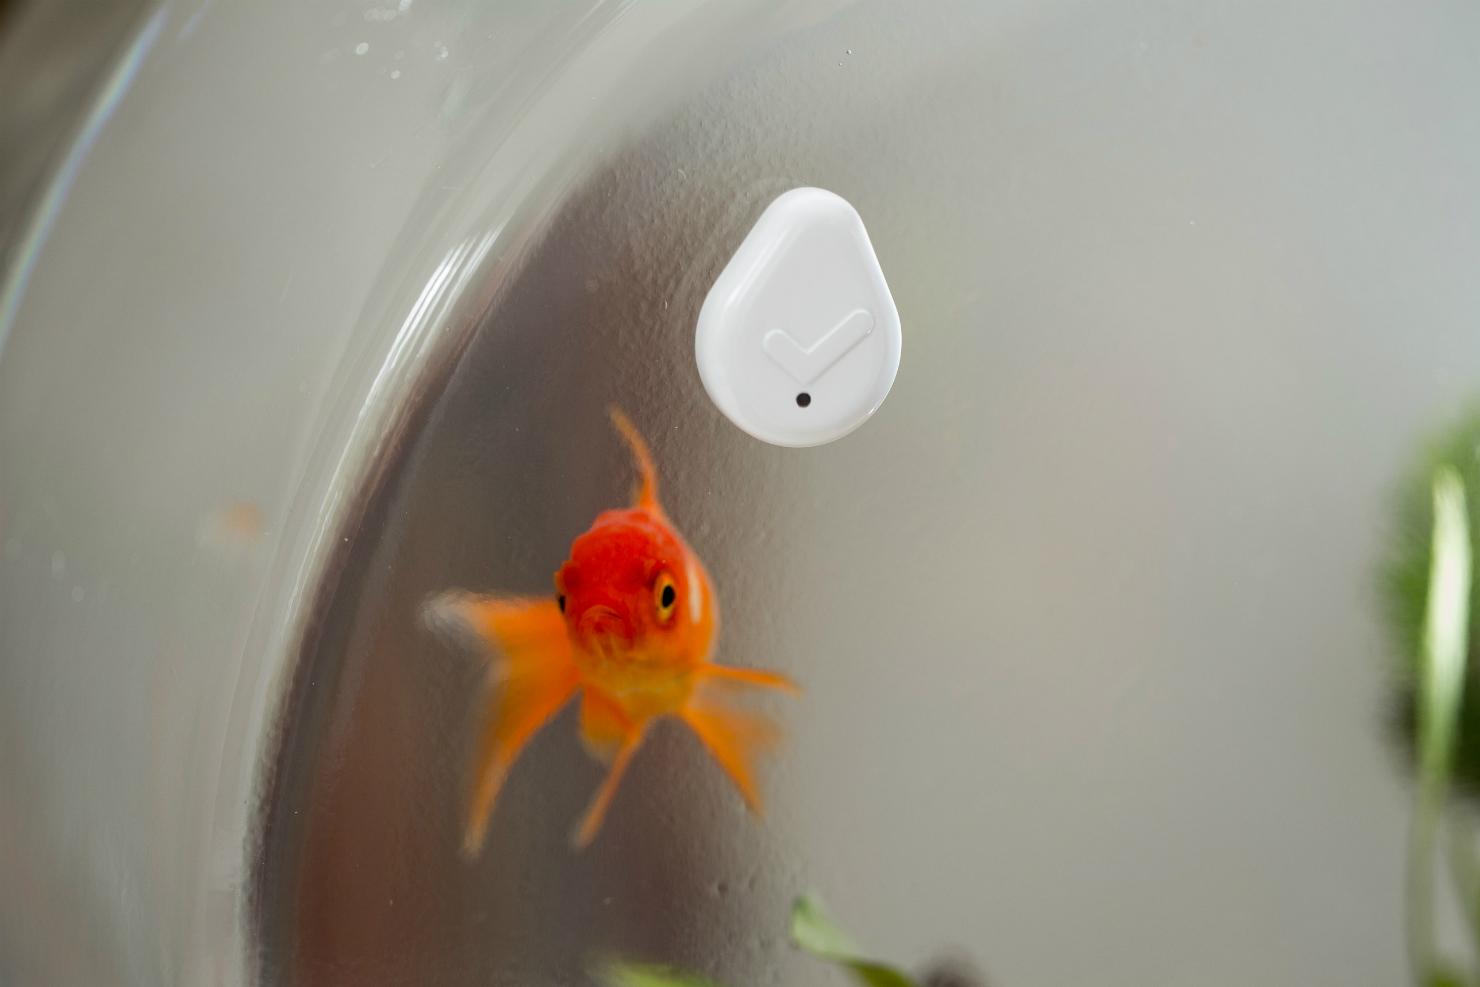 droplet is a reminder button for everyday chores fish